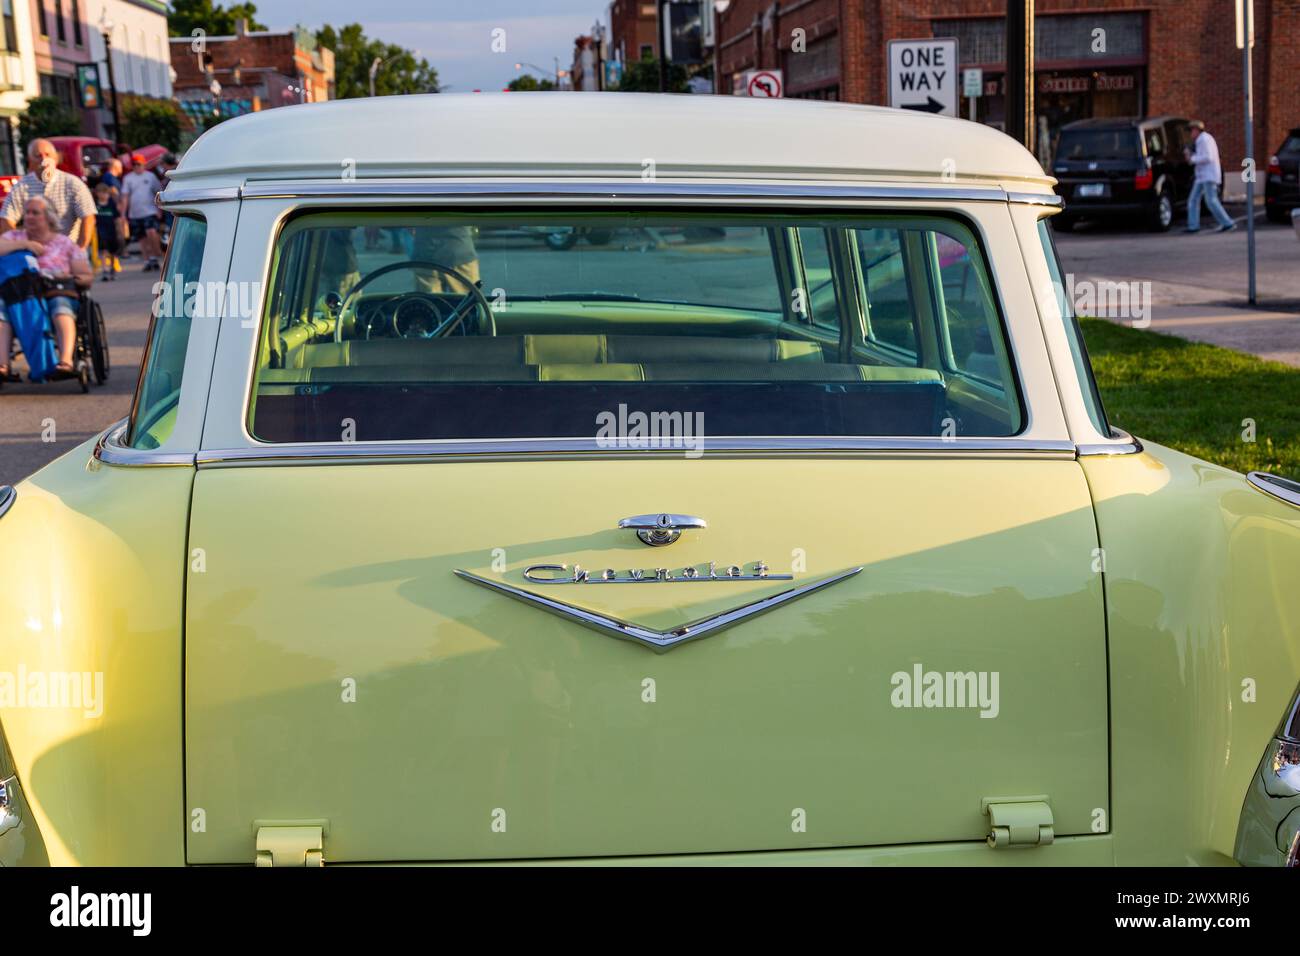 The tailgate and rear window of a yellow 1957 Chevrolet Two Ten station wagon on display at a car show in downtown Auburn, Indiana, USA. Stock Photo